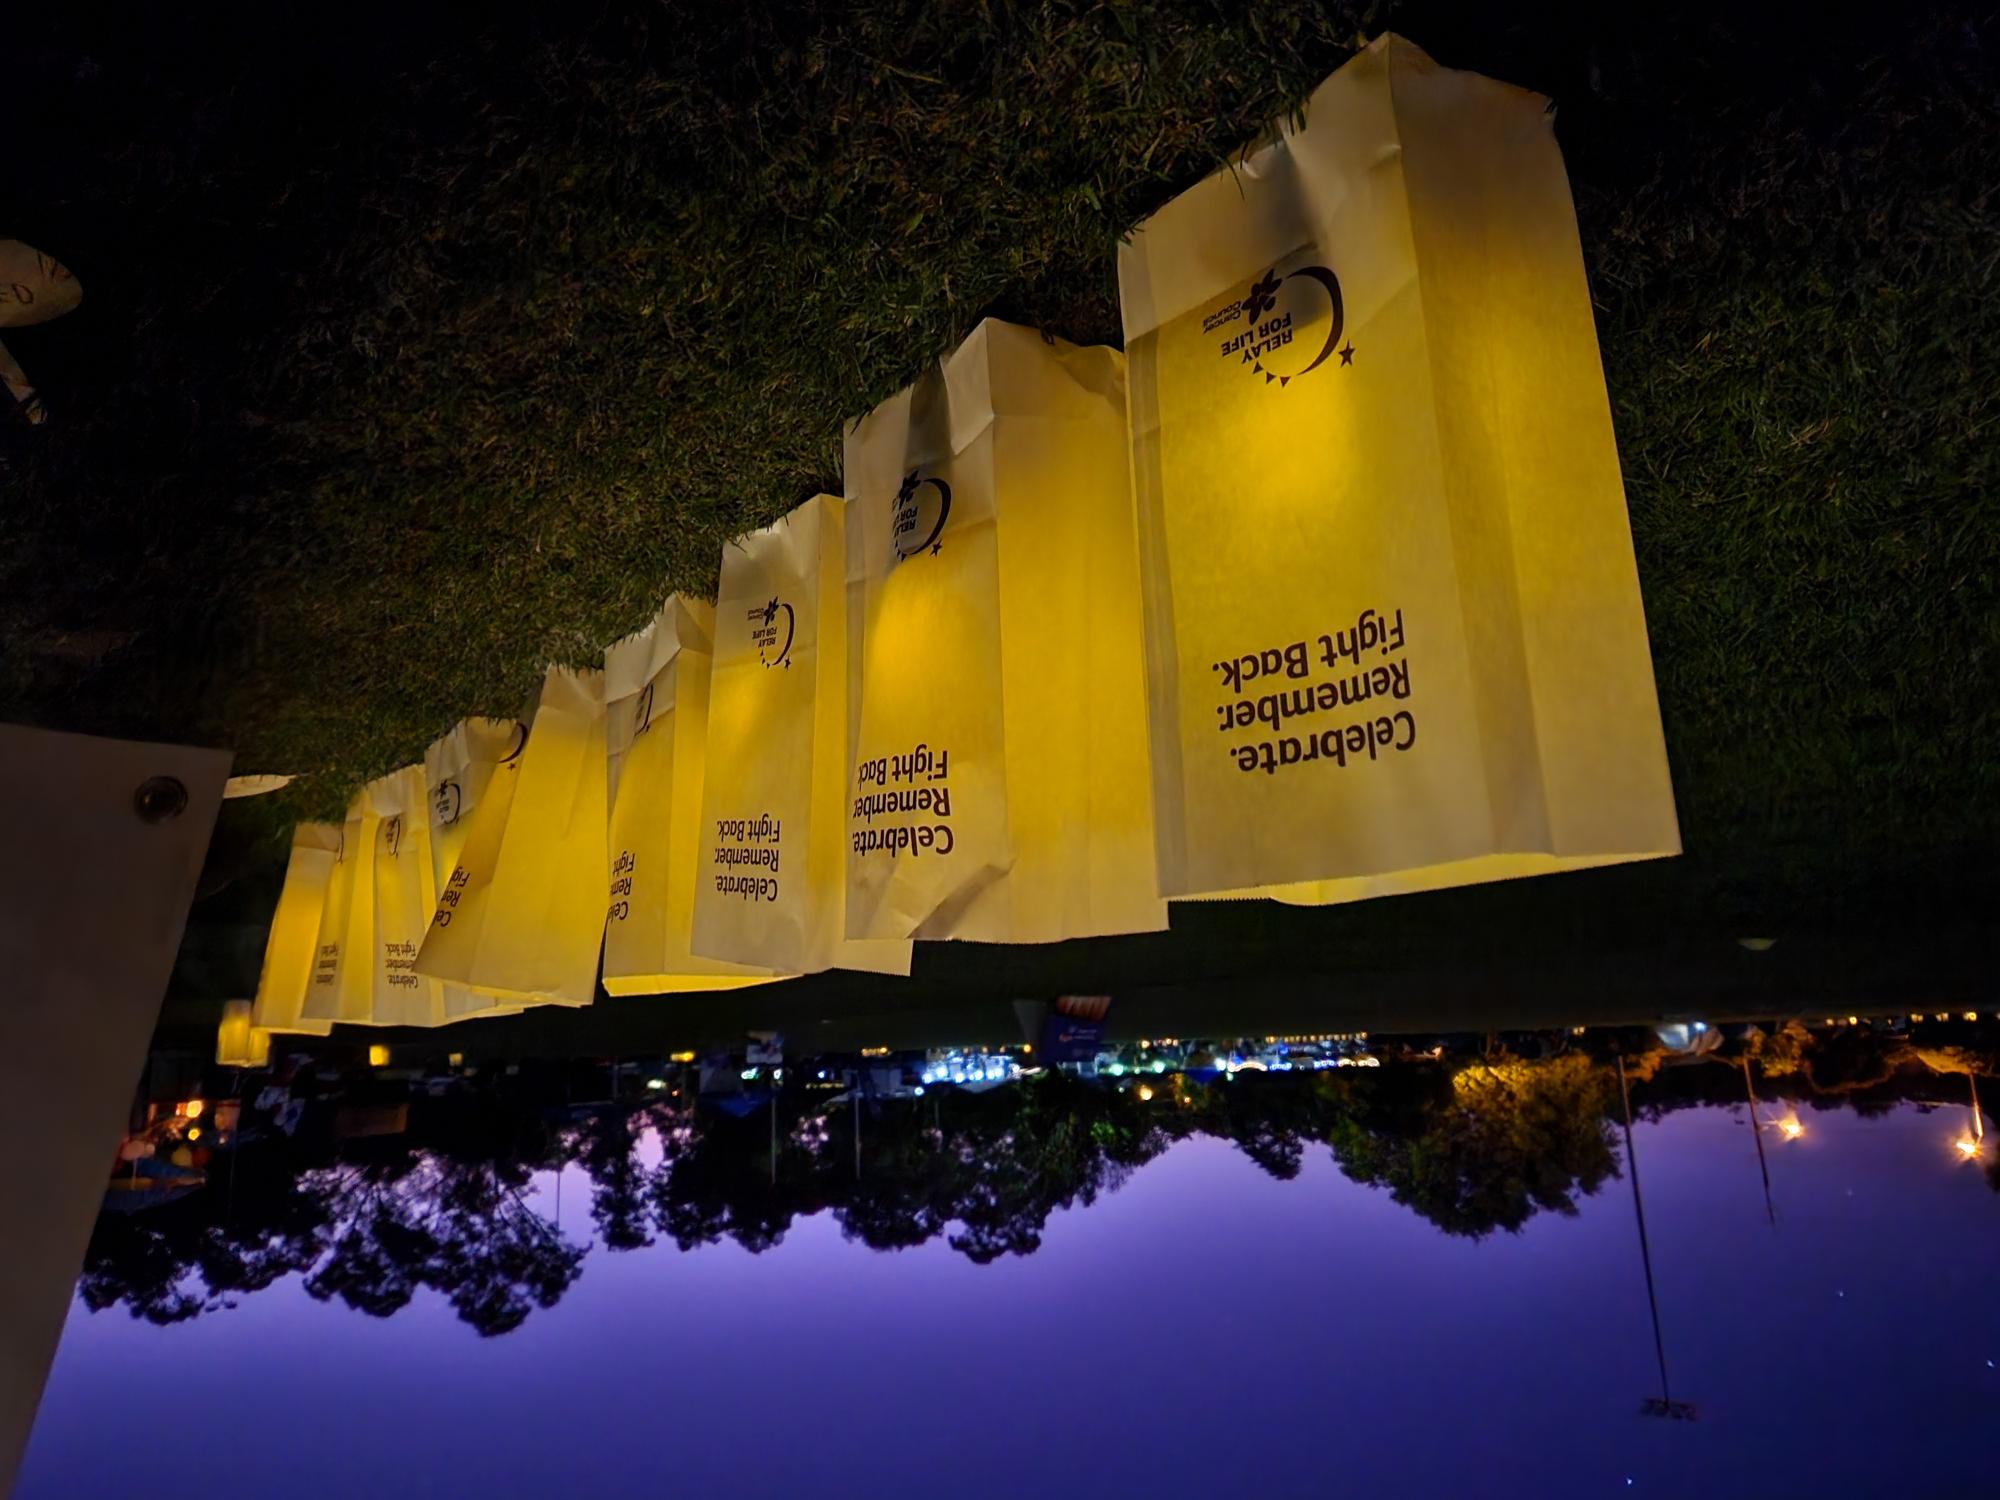 Relay candlelight bags lit at dusk